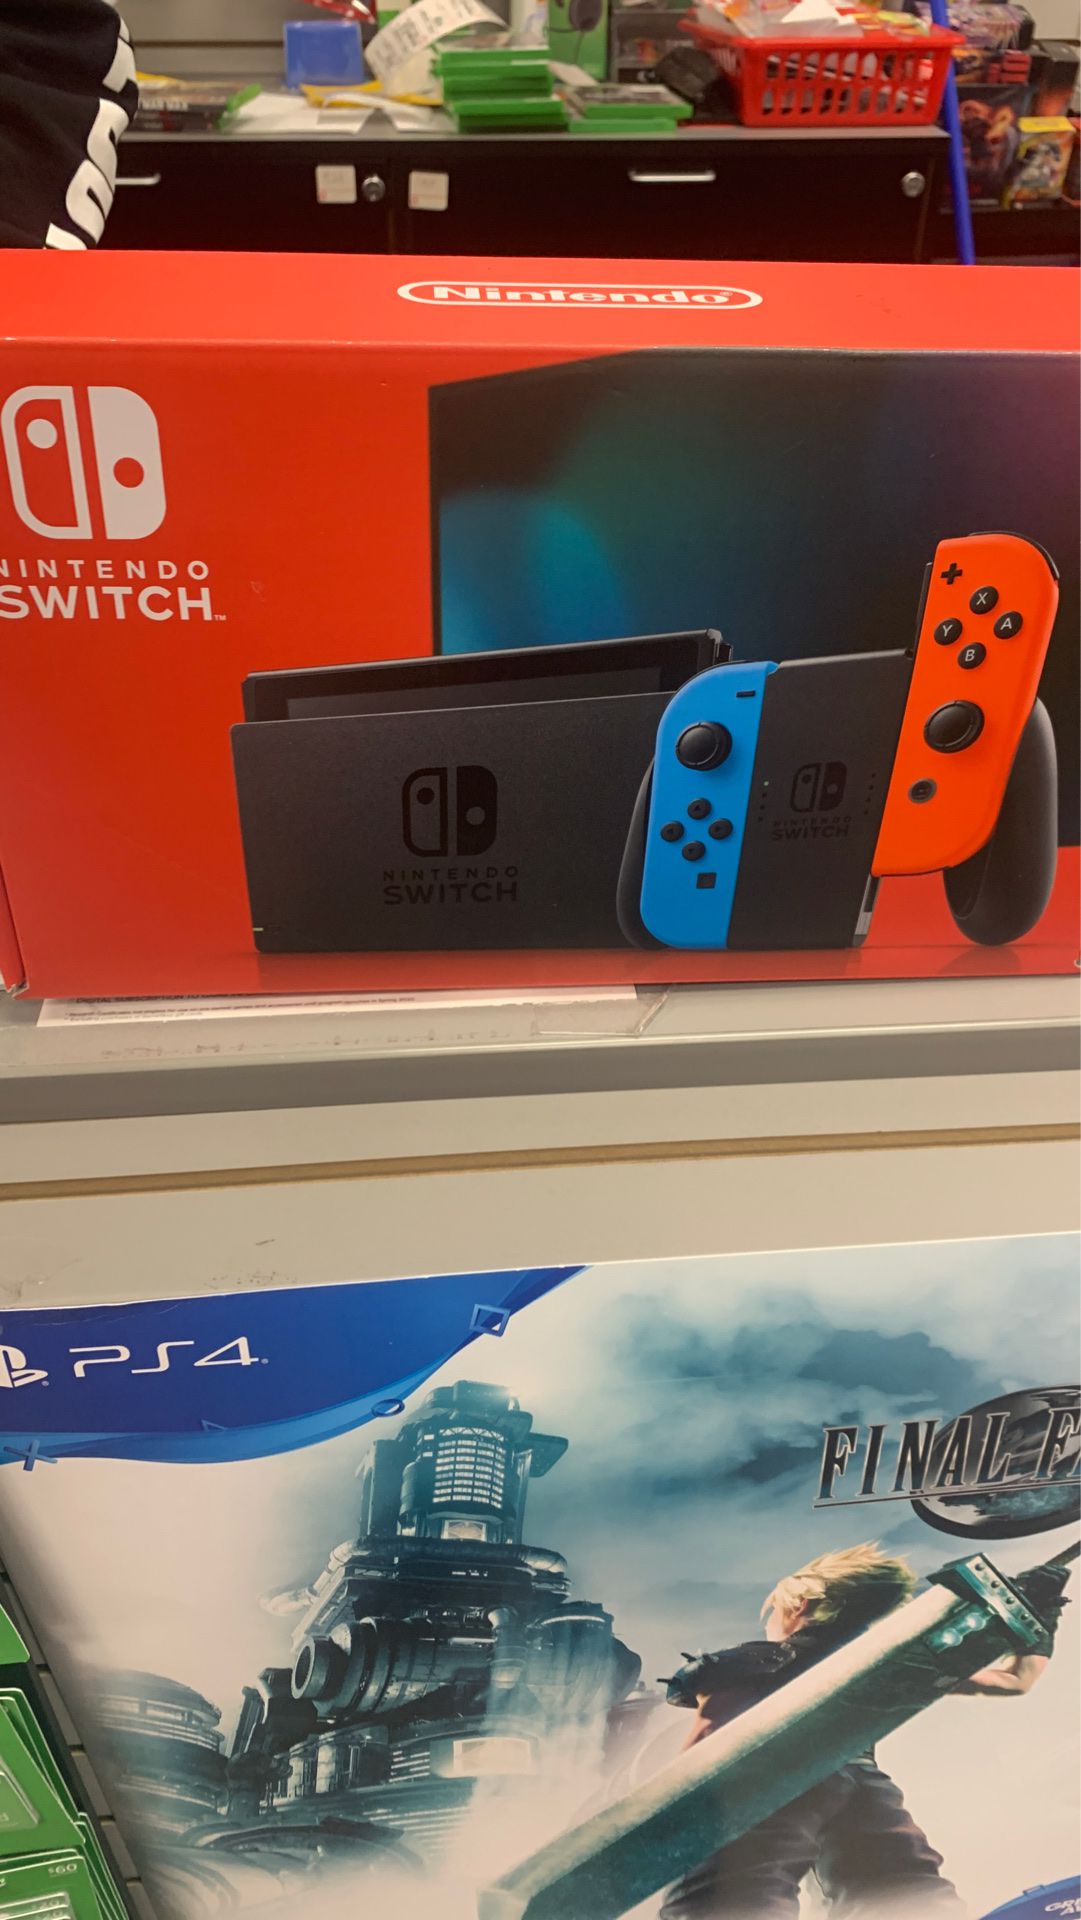 Nitendo switch brand new out box with game